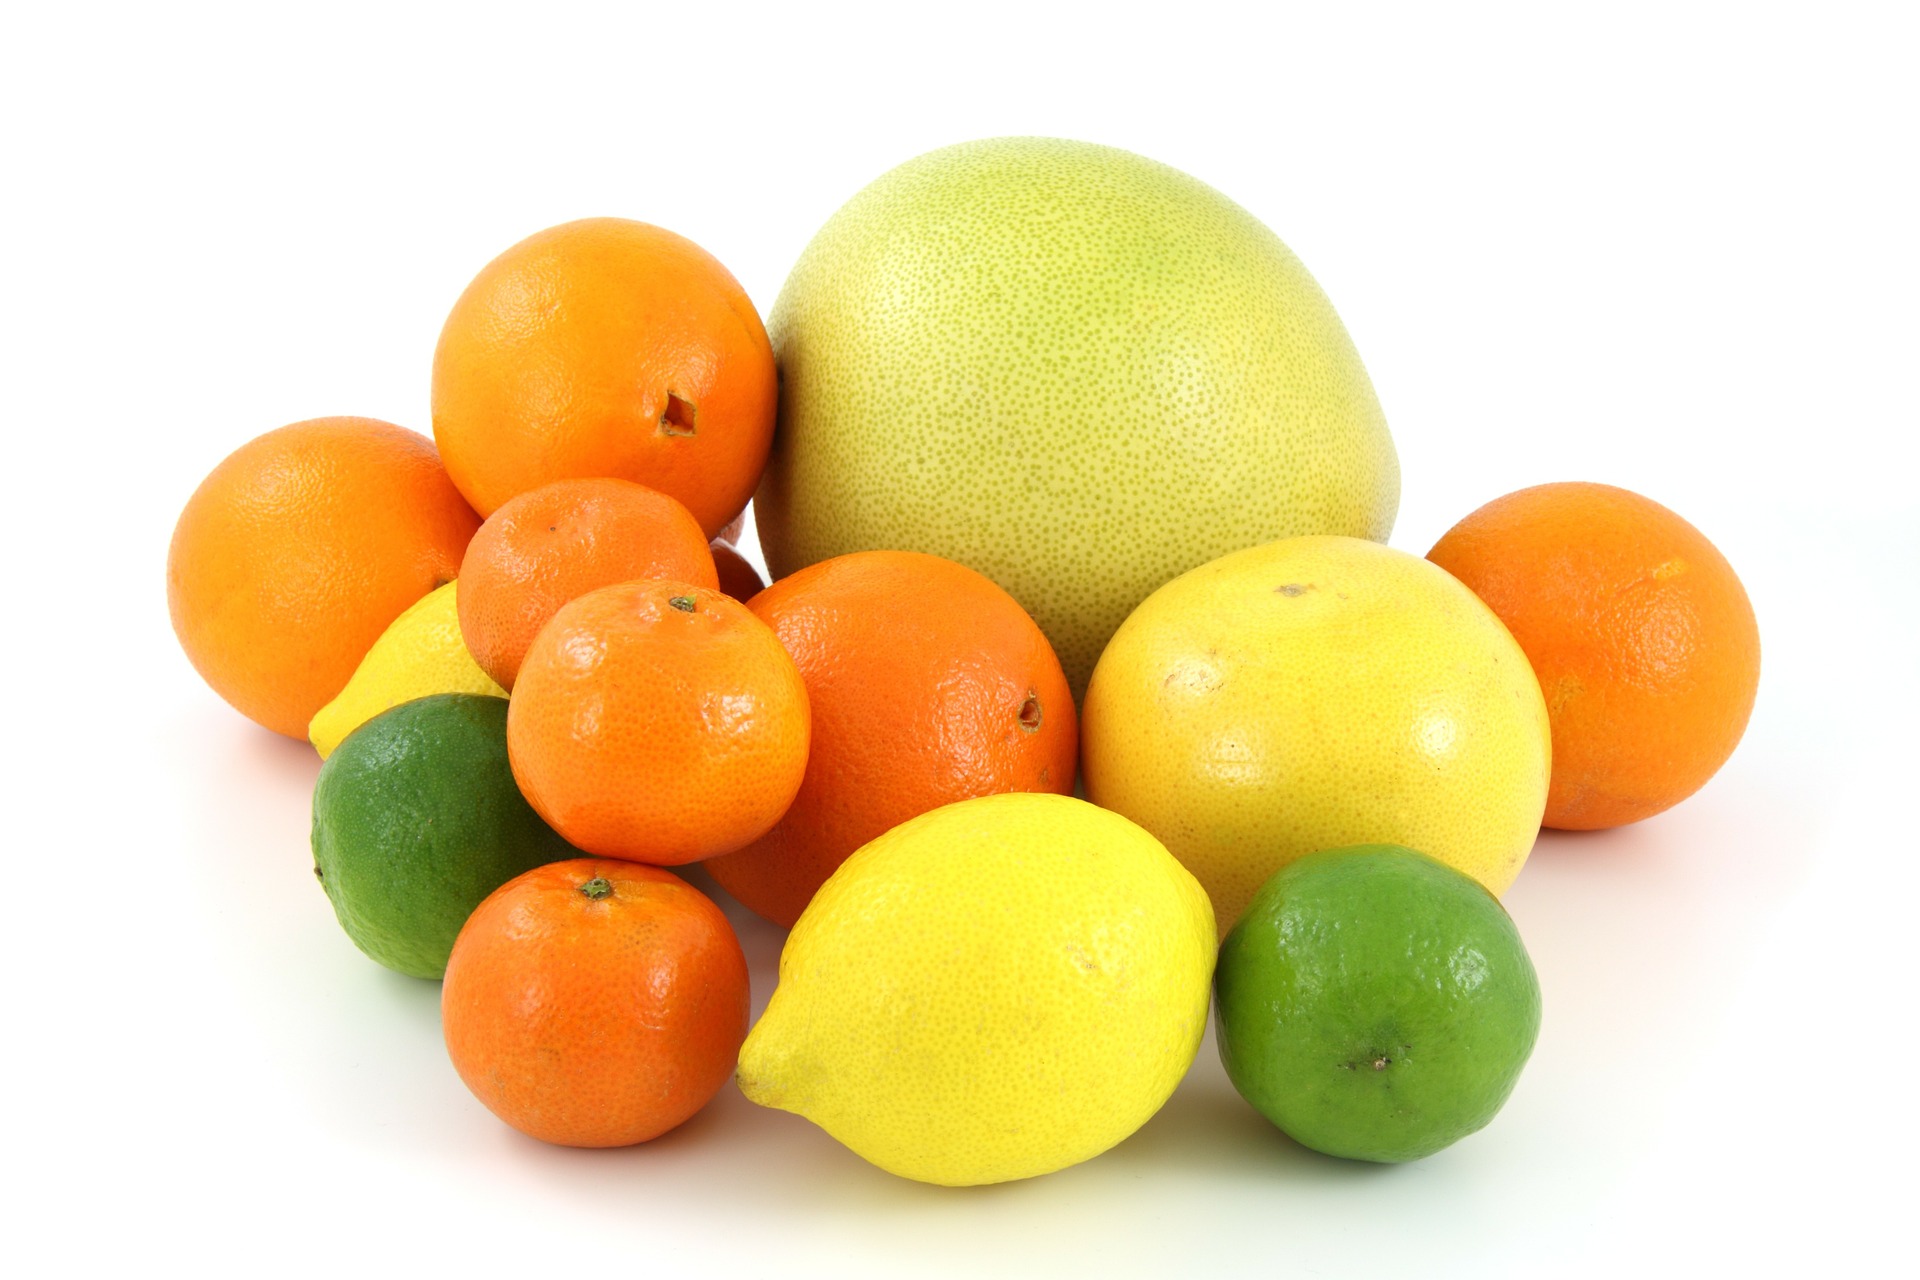 Overview of the citrus family